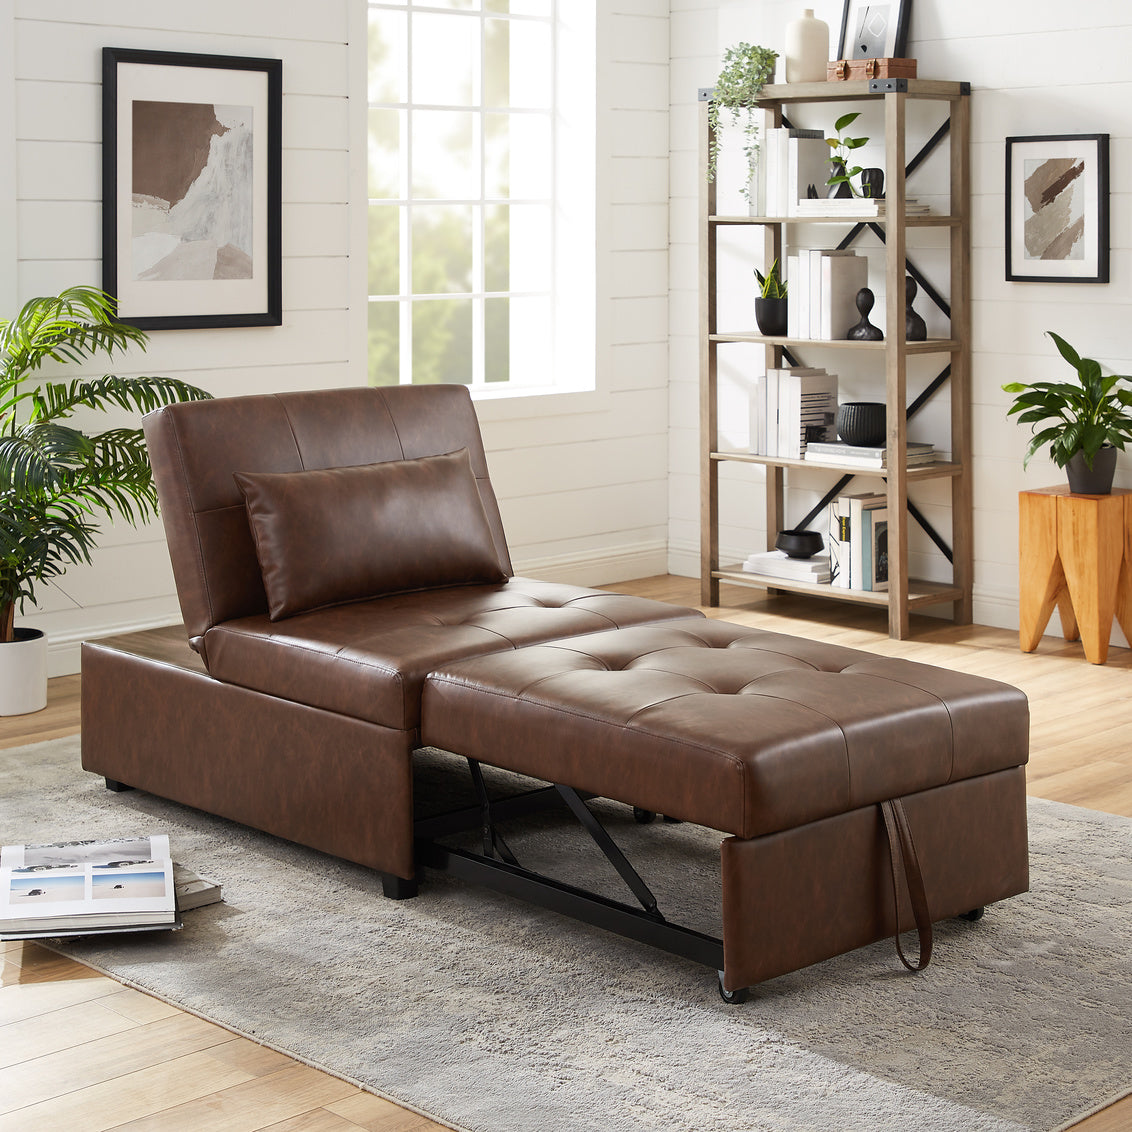 WEEKLY or MONTHLY. Dozer Brown Sofa Bed or Armless Chair